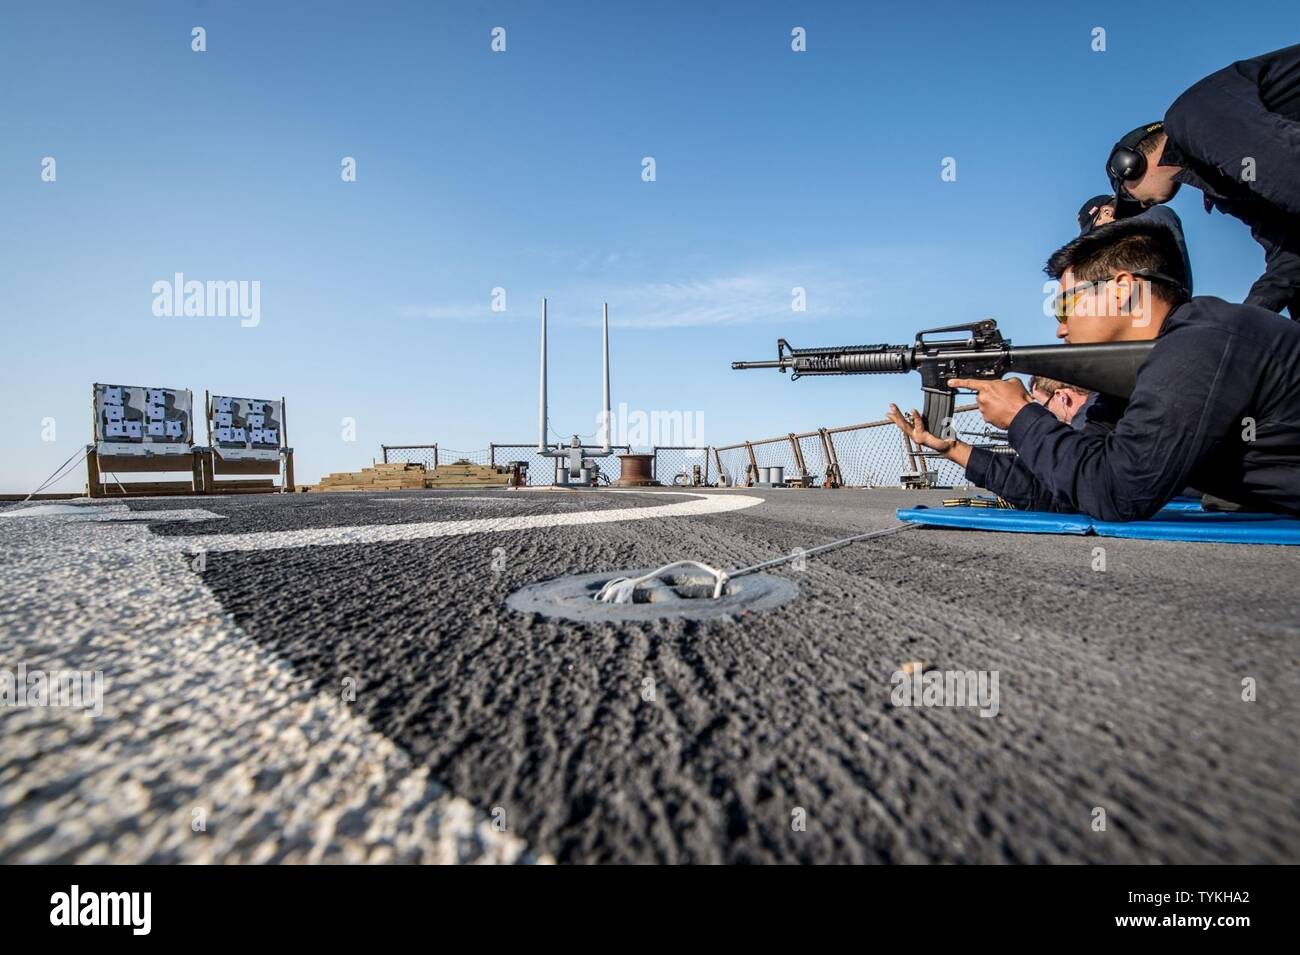 SEA OF JAPAN (Nov. 14, 2016) Petty Officer 3rd Class Eric Nieto loads a magazine into an M16 rifle aboard the forward-deployed Arleigh Burke-class guided-missile destroyer USS Barry (DDG 52) during small arms qualification training. Barry is on patrol in the U.S. 7th Fleet area of operations supporting security and stability in the Indo-Asia-Pacific region. Stock Photo